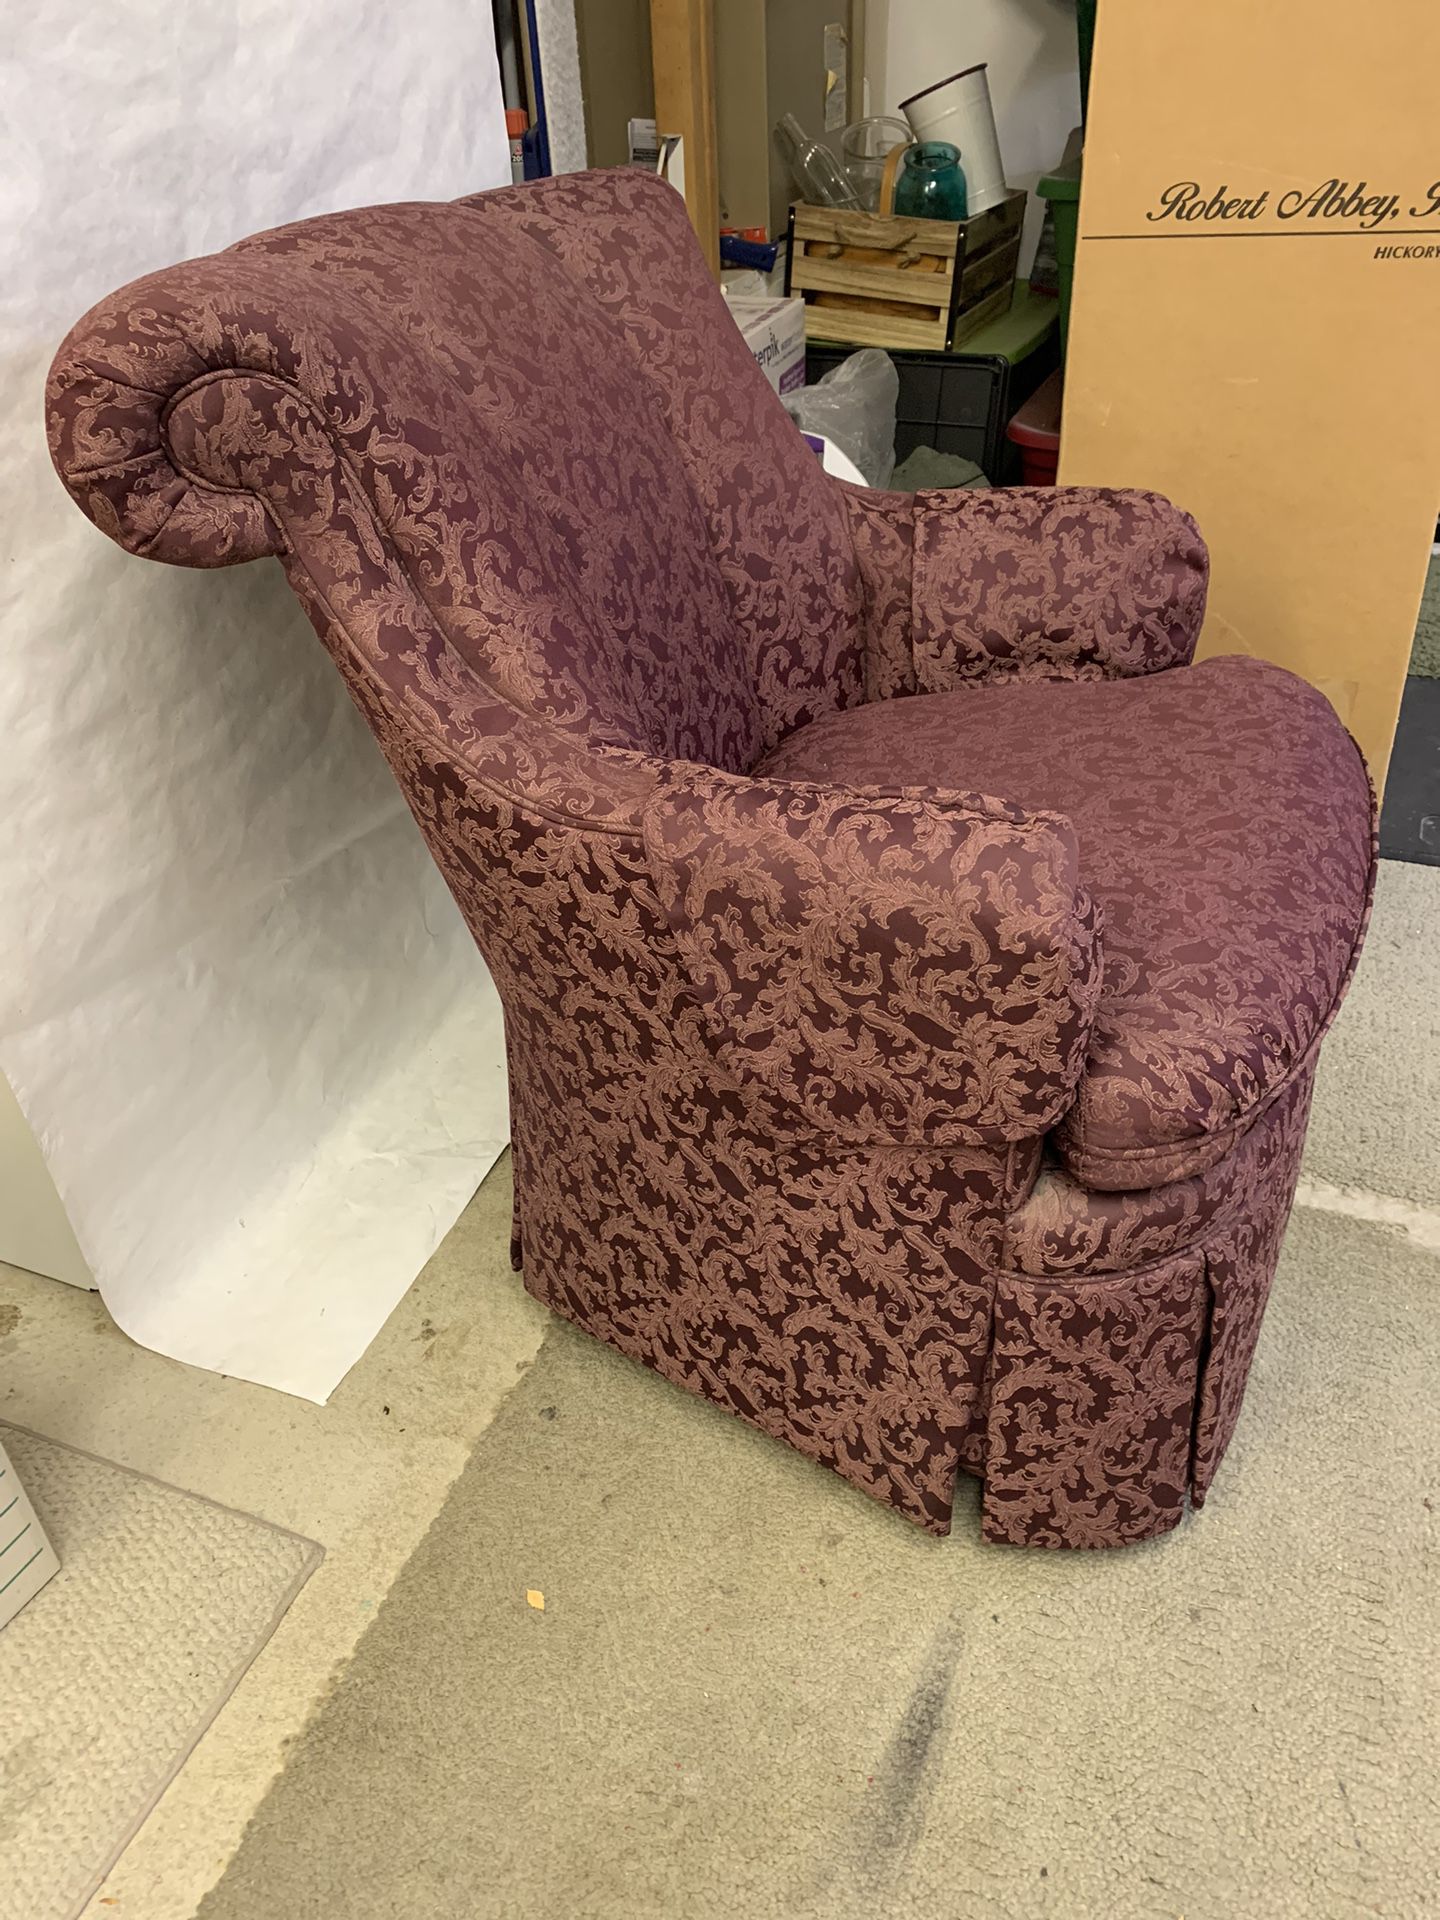 A PAIR OF VERY COMFORTABLE  SITTING CHAIRS